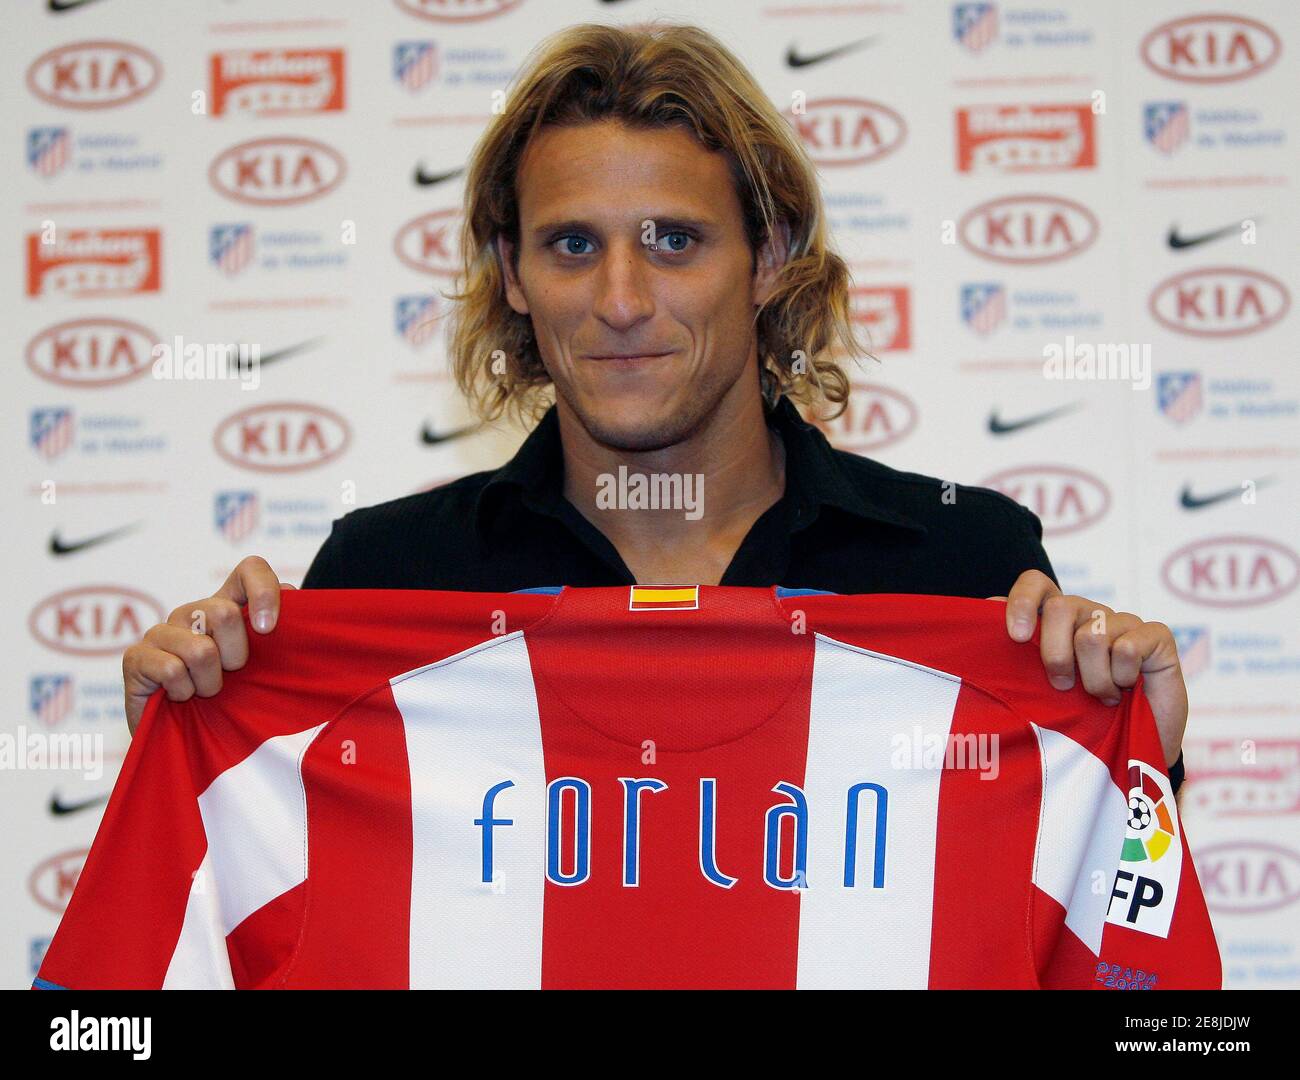 Diego Forlan of Uruguay who was newly signed by Atletico Madrid controls  the ball during his presentation at the Vicente Calderon stadium in Madrid  July 17, 2007. REUTERS/Andrea Comas (SPAIN Fotografía de